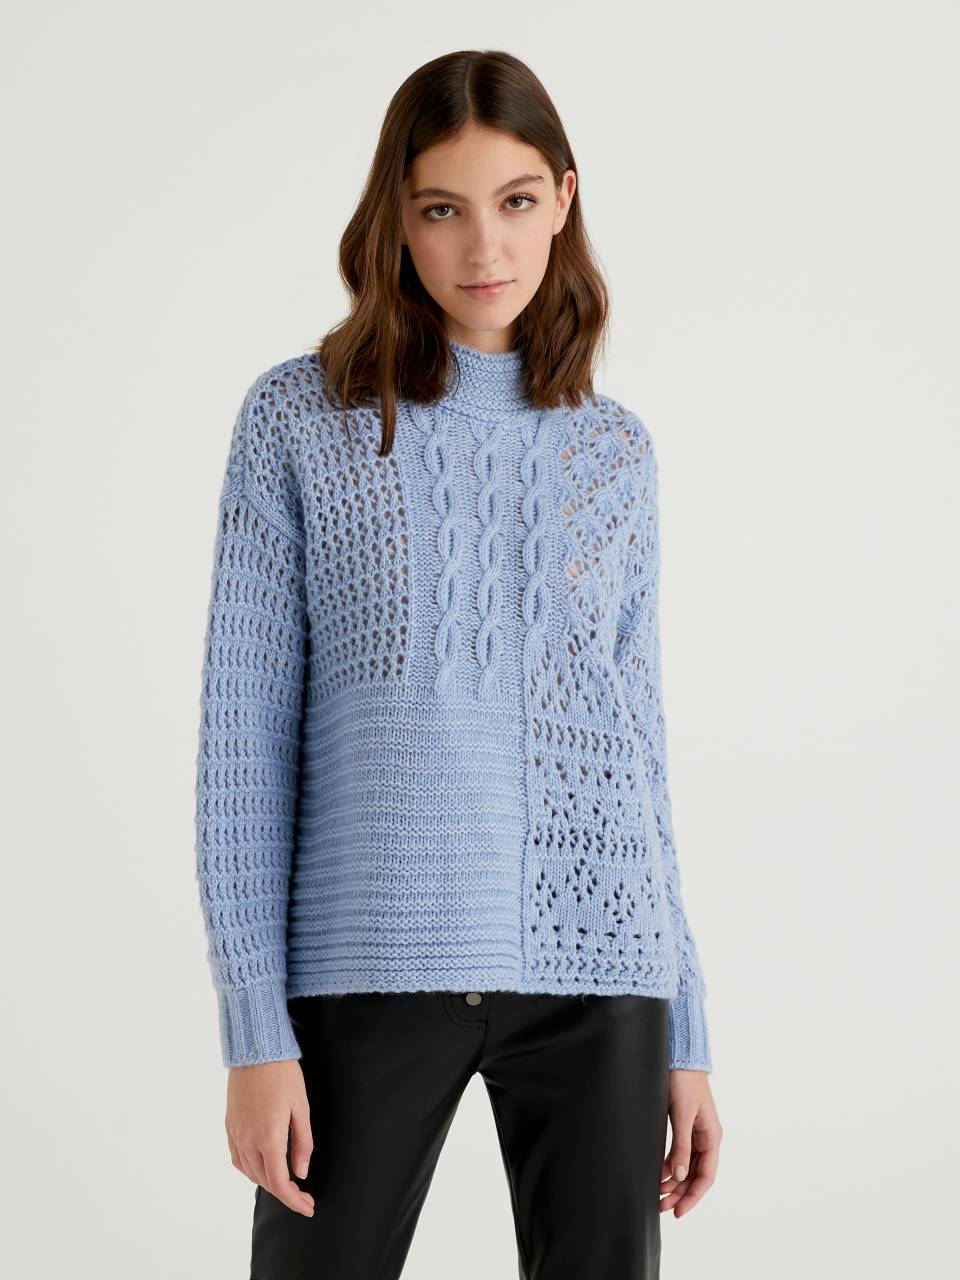 Benetton Knit sweater with high neck. 1